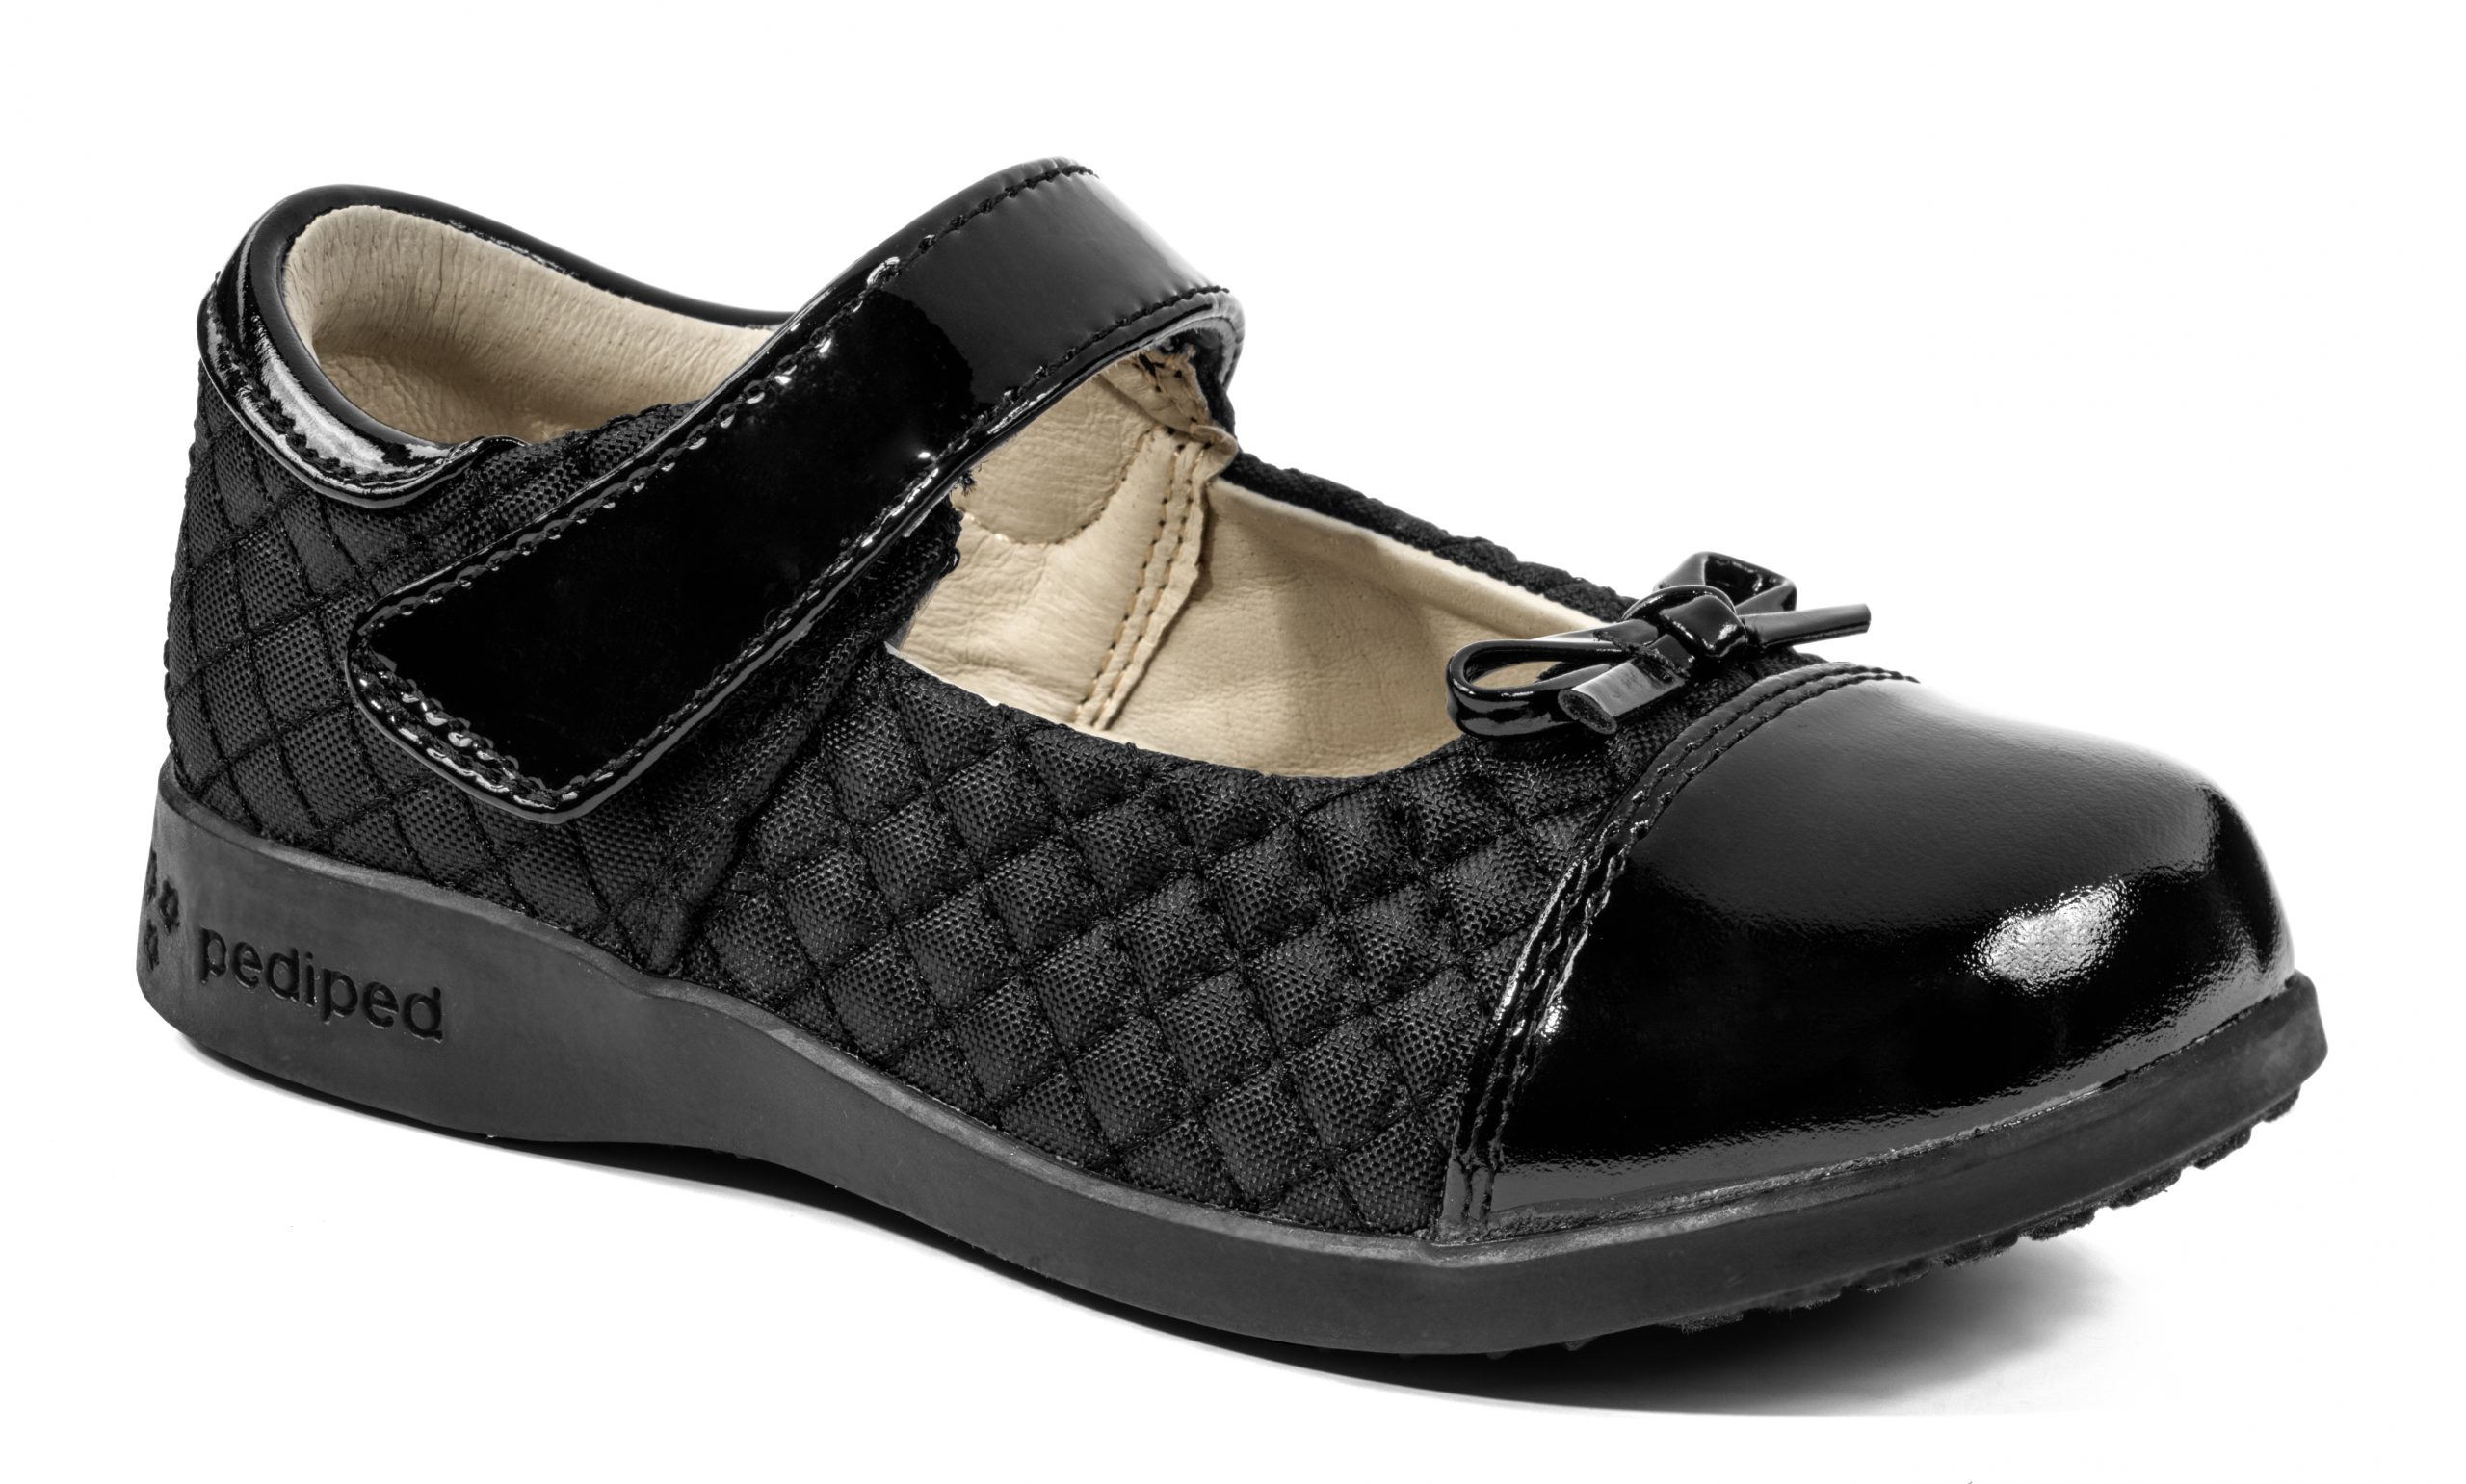 Rubber soled girls shoe